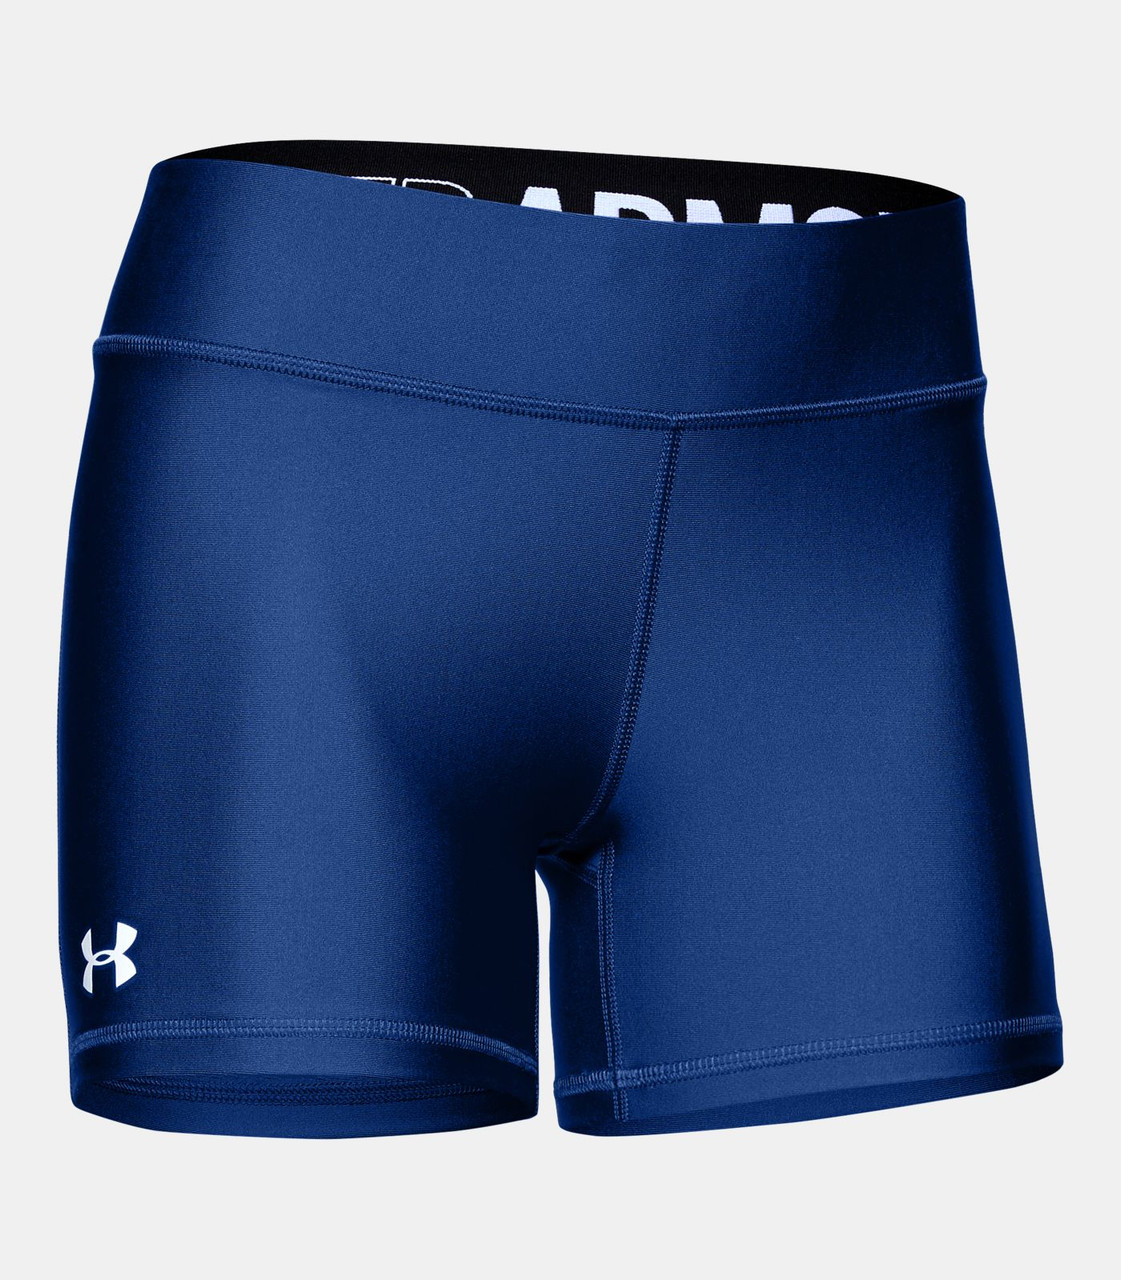 Under Armour Team Shorty 4 Inch | Real Volleyball